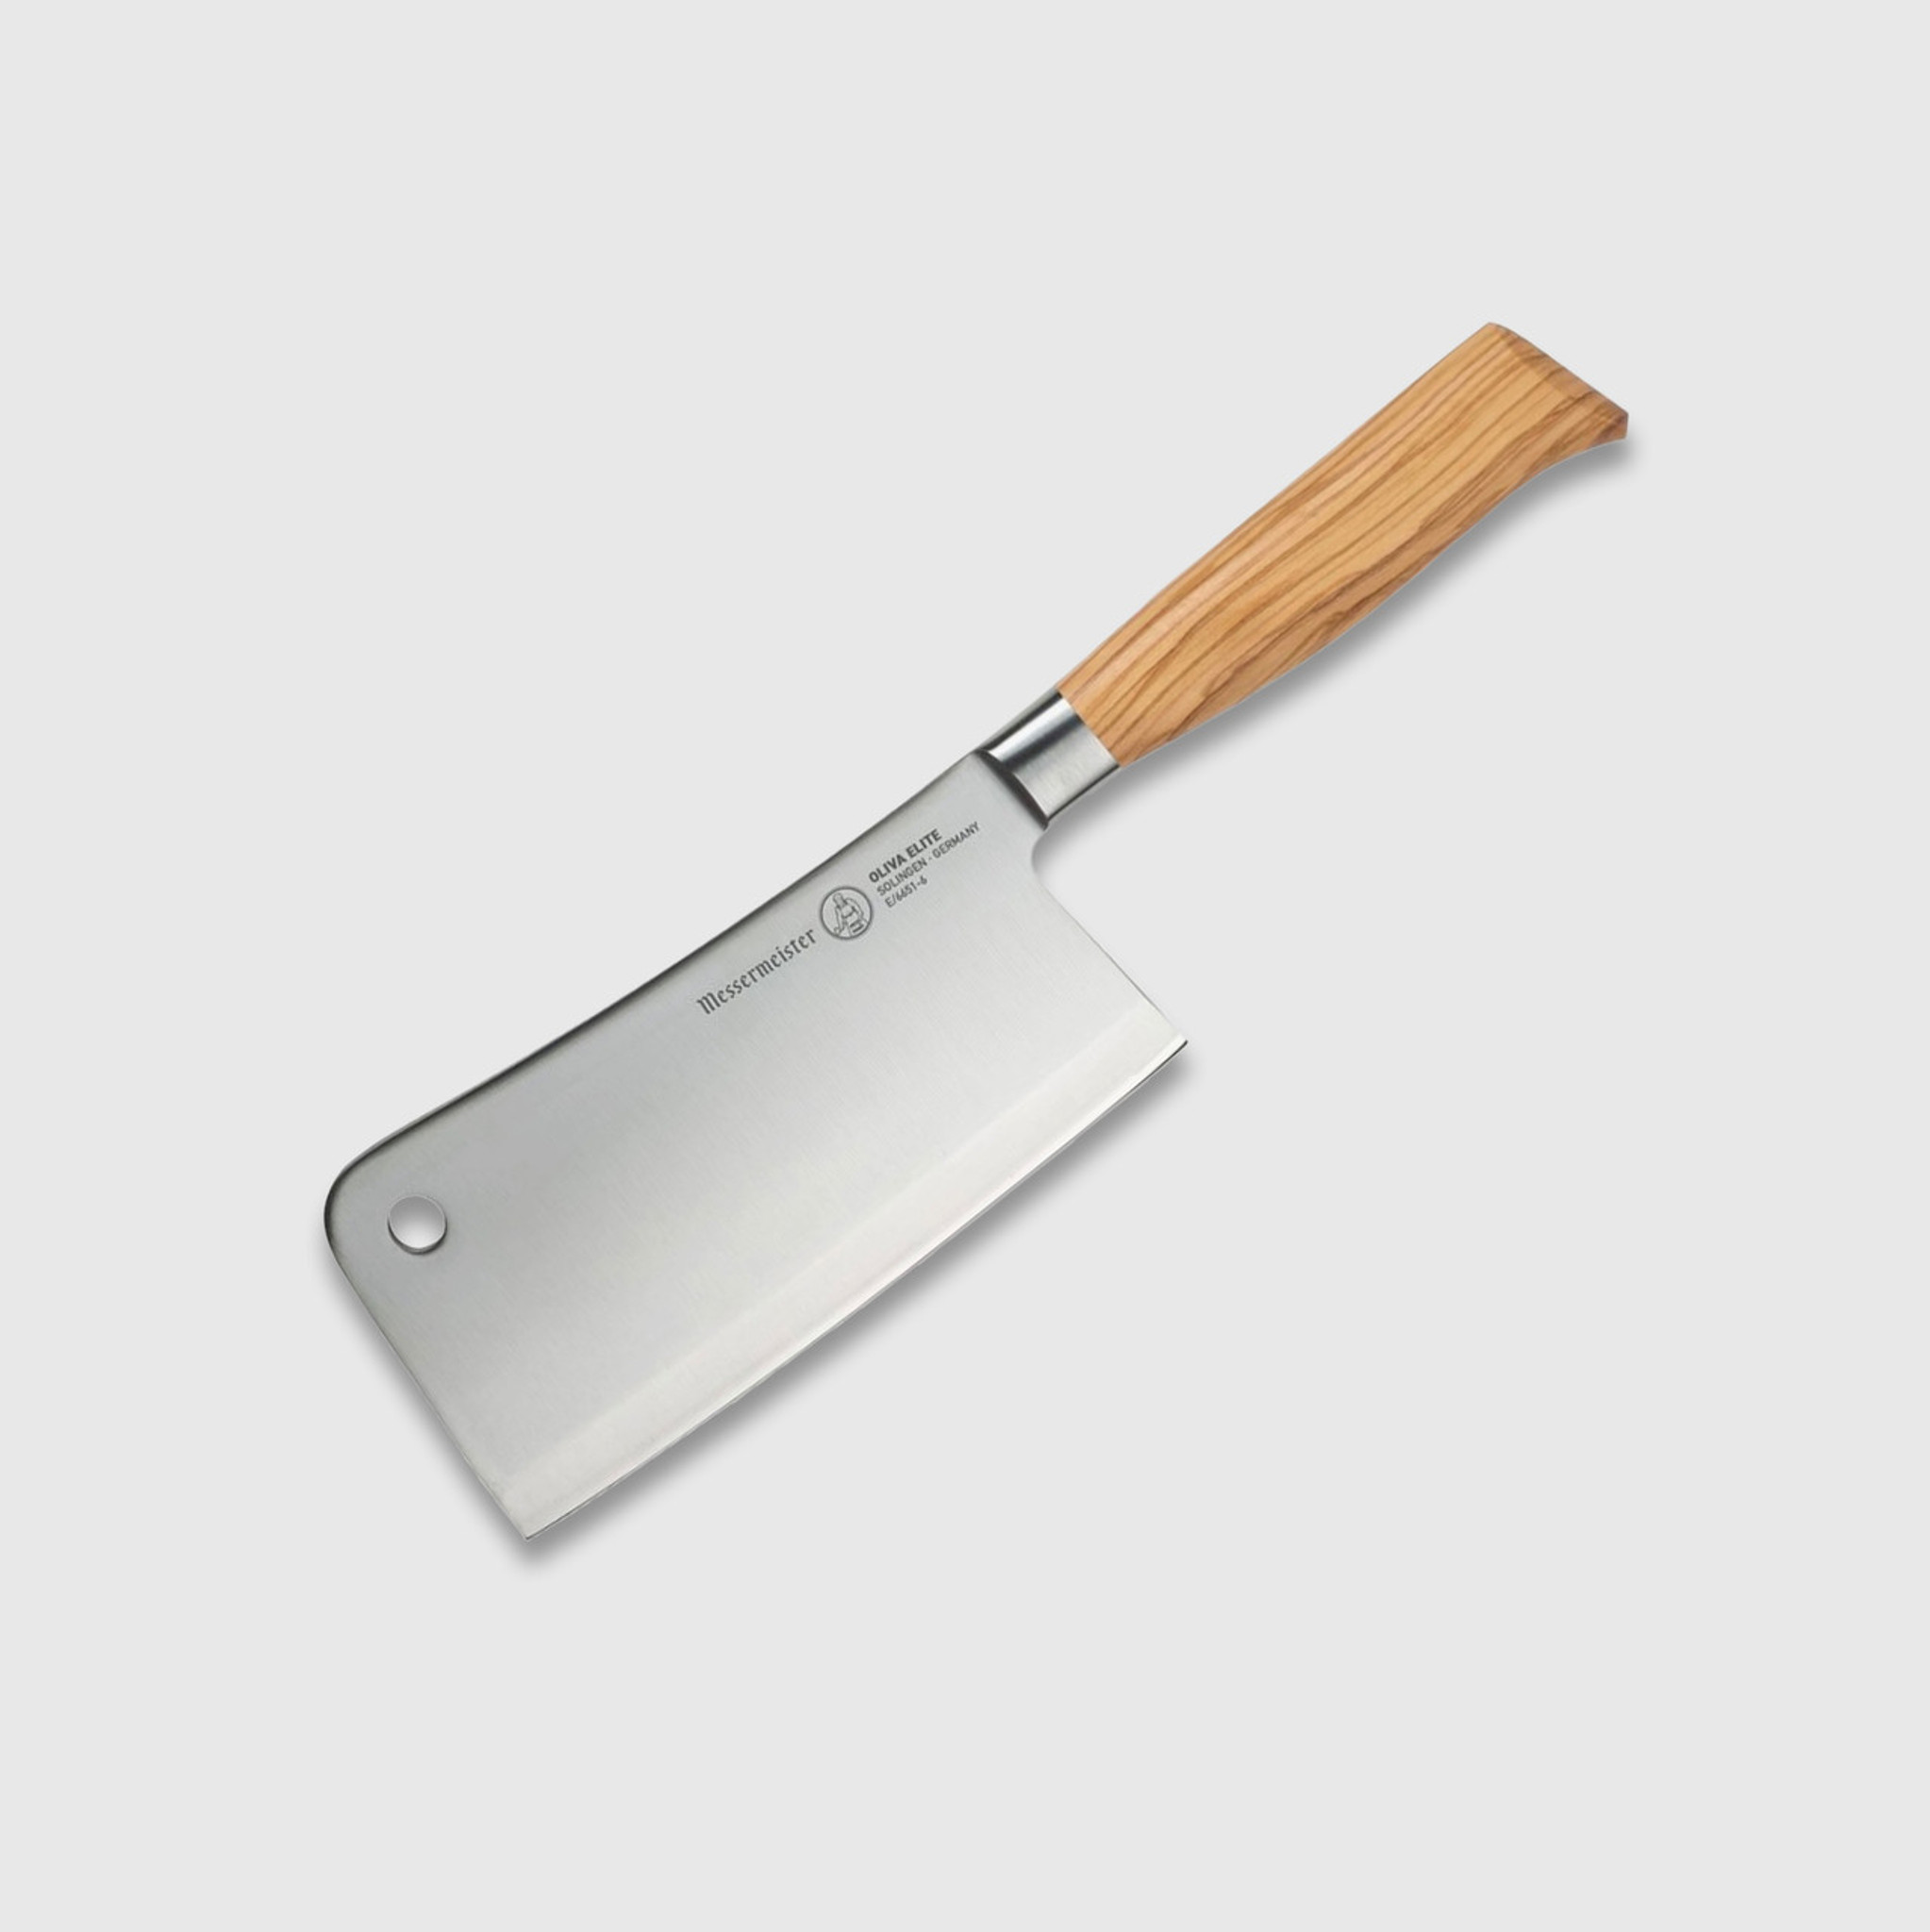 https://cdn11.bigcommerce.com/s-btwlt97xs5/images/stencil/2048x2048/products/928/10582/messermeister-oliva-elite-6-in-meat-cleaver-with-olive-wood-handle__86610.1701257252.jpg?c=1